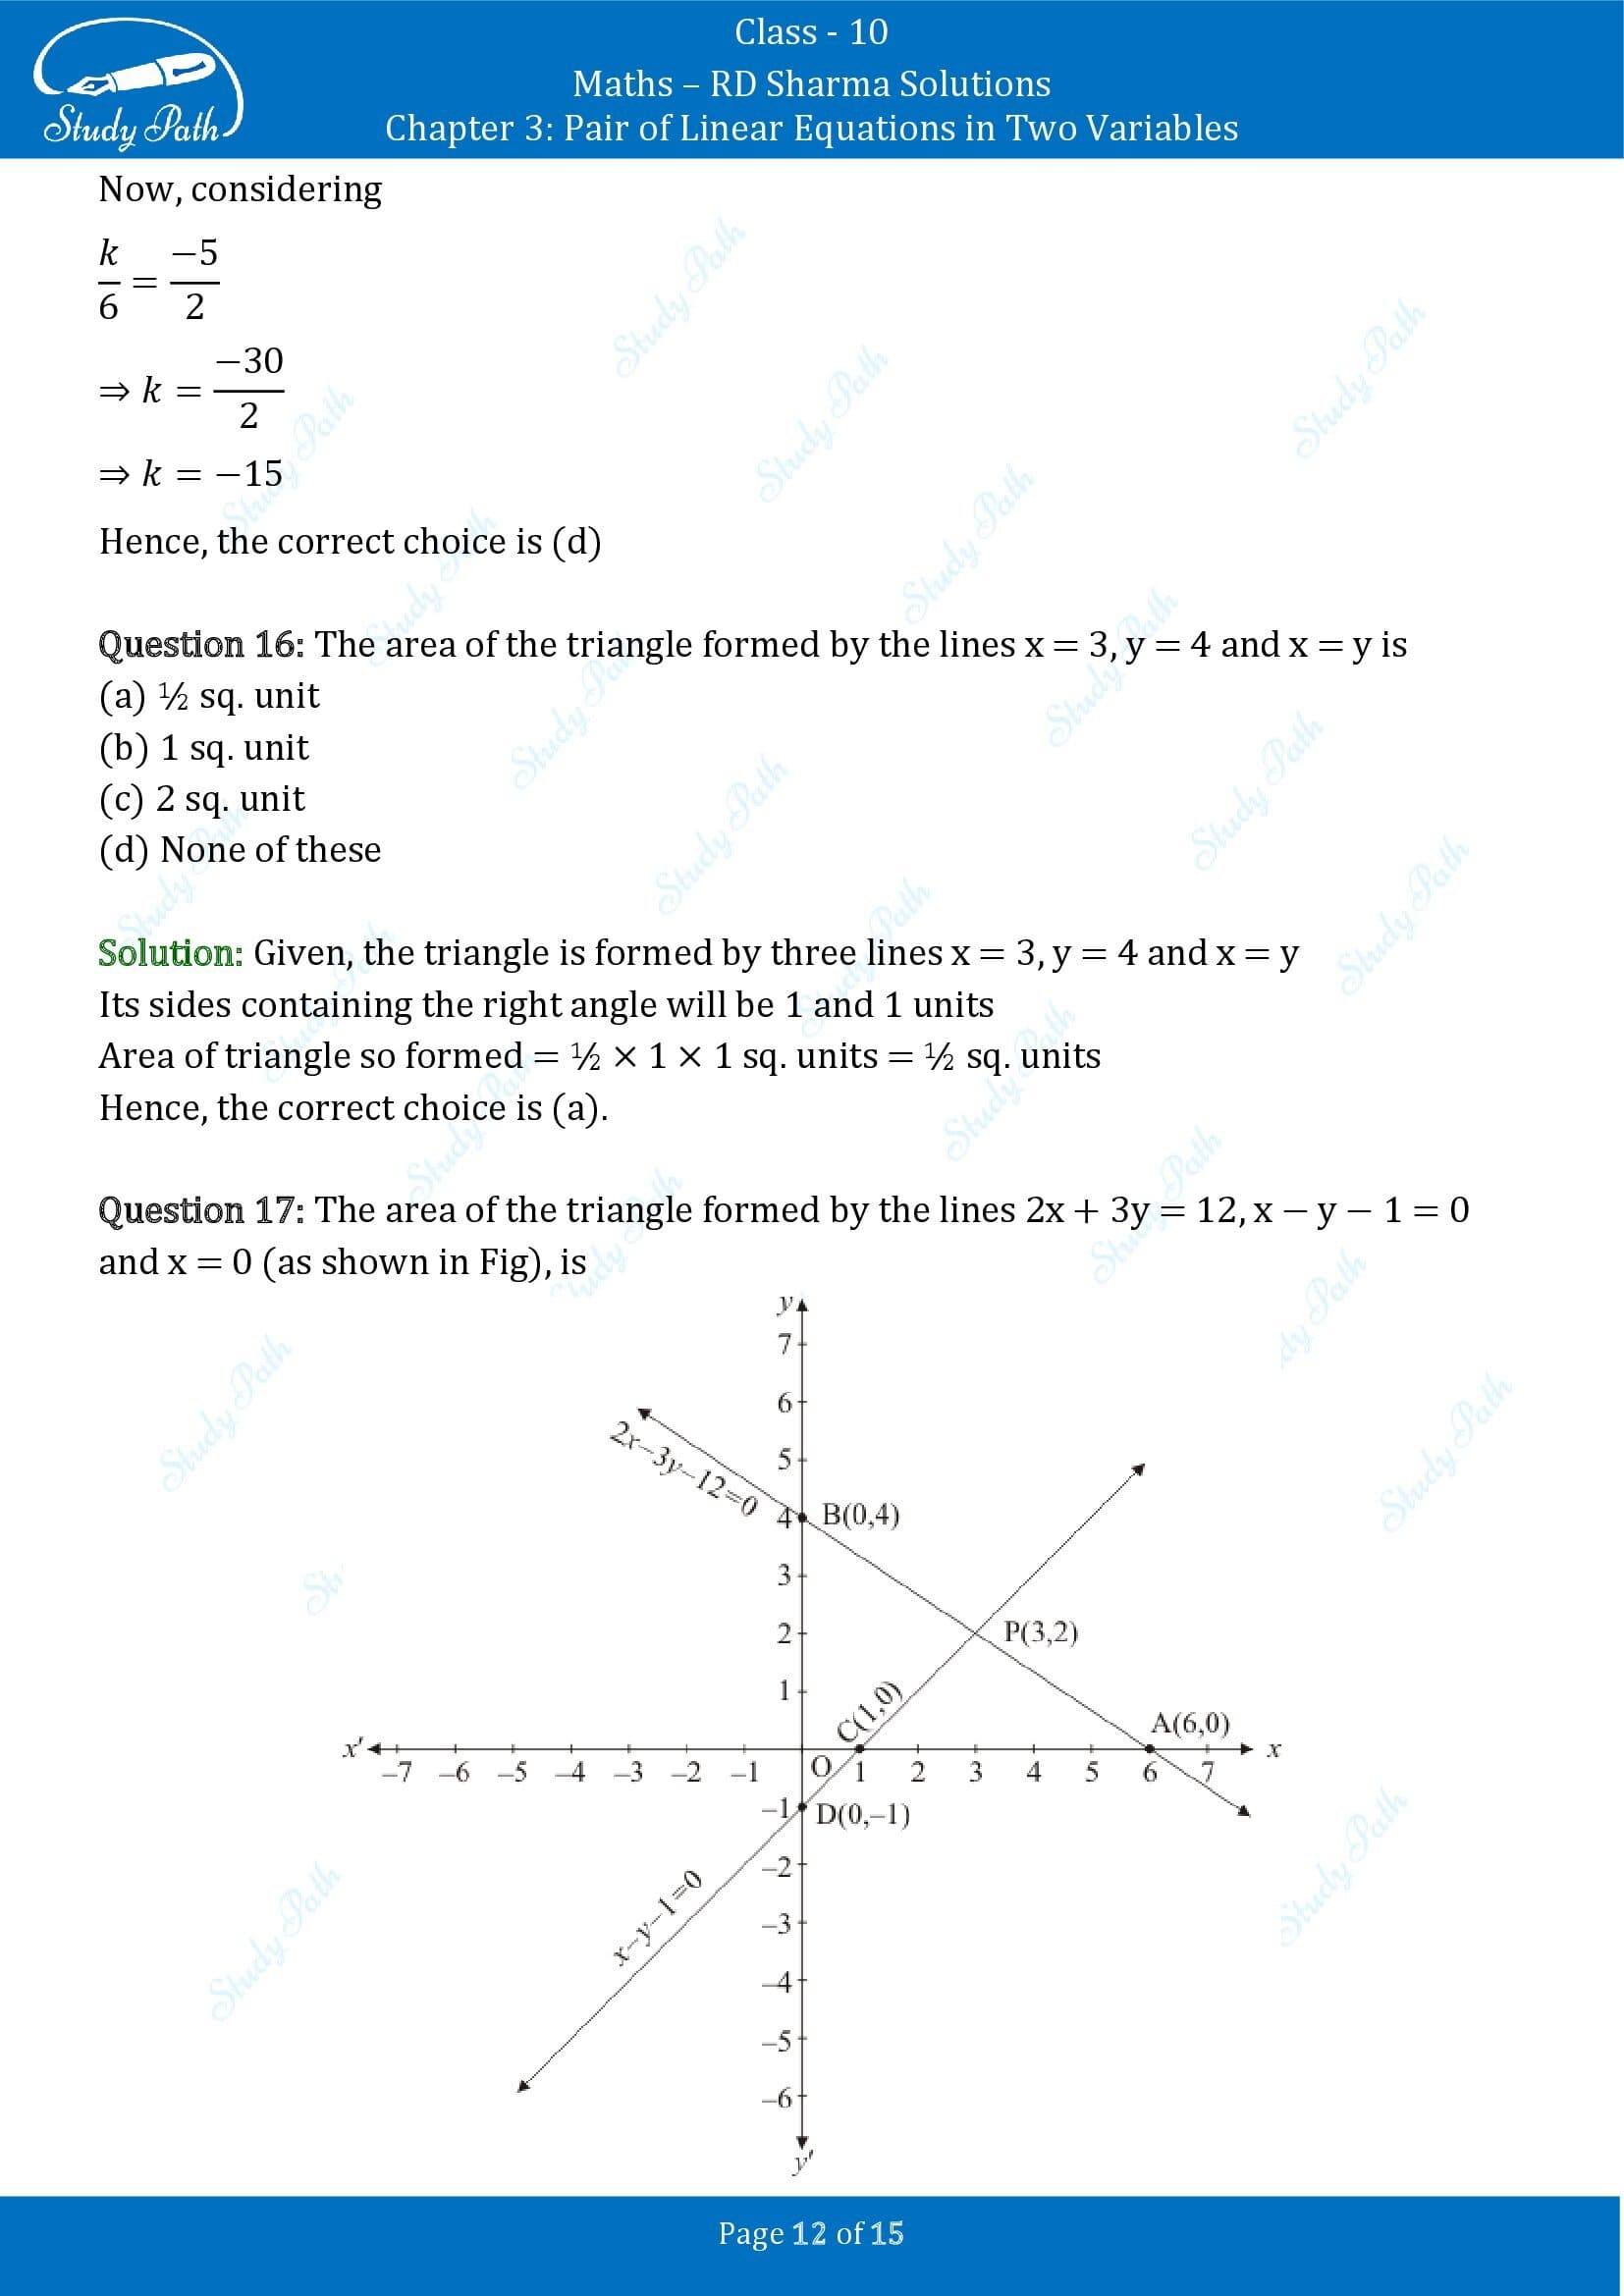 RD Sharma Solutions Class 10 Chapter 3 Pair of Linear Equations in Two Variables Multiple Choice Questions MCQs 00012